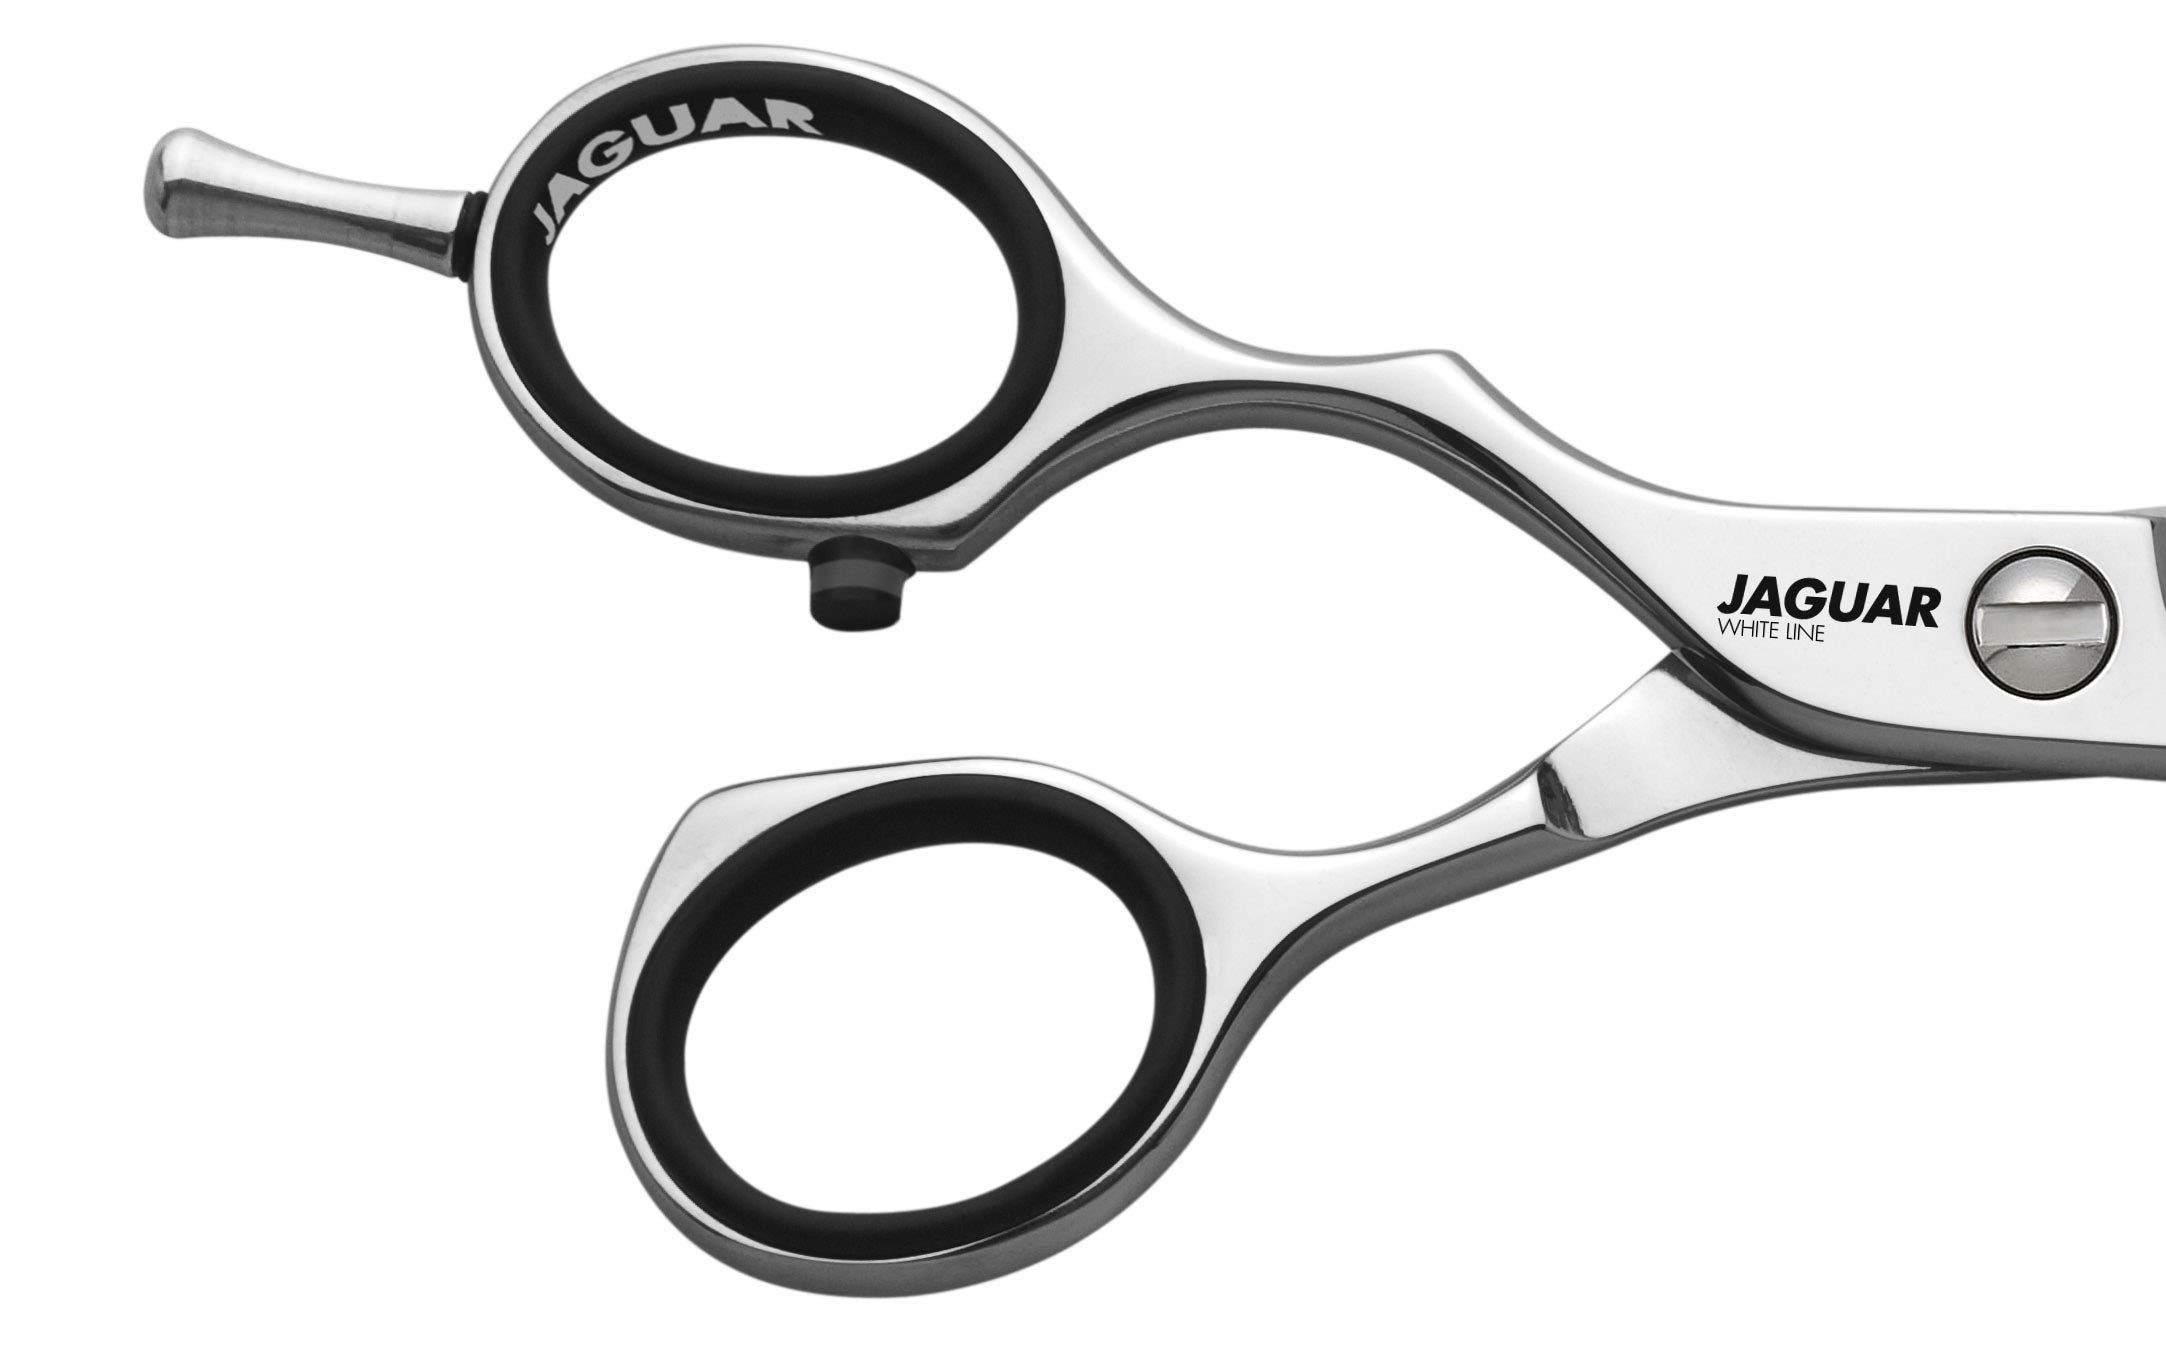 Jaguar Shears White Line JP 38 5.25 Inch Left Handed Thinner Professional, Ergonomic, Steel Hair Thinning, Texturizing, Cutting & Trimming Scissors for Salon Stylists, Beauticians, Barbers